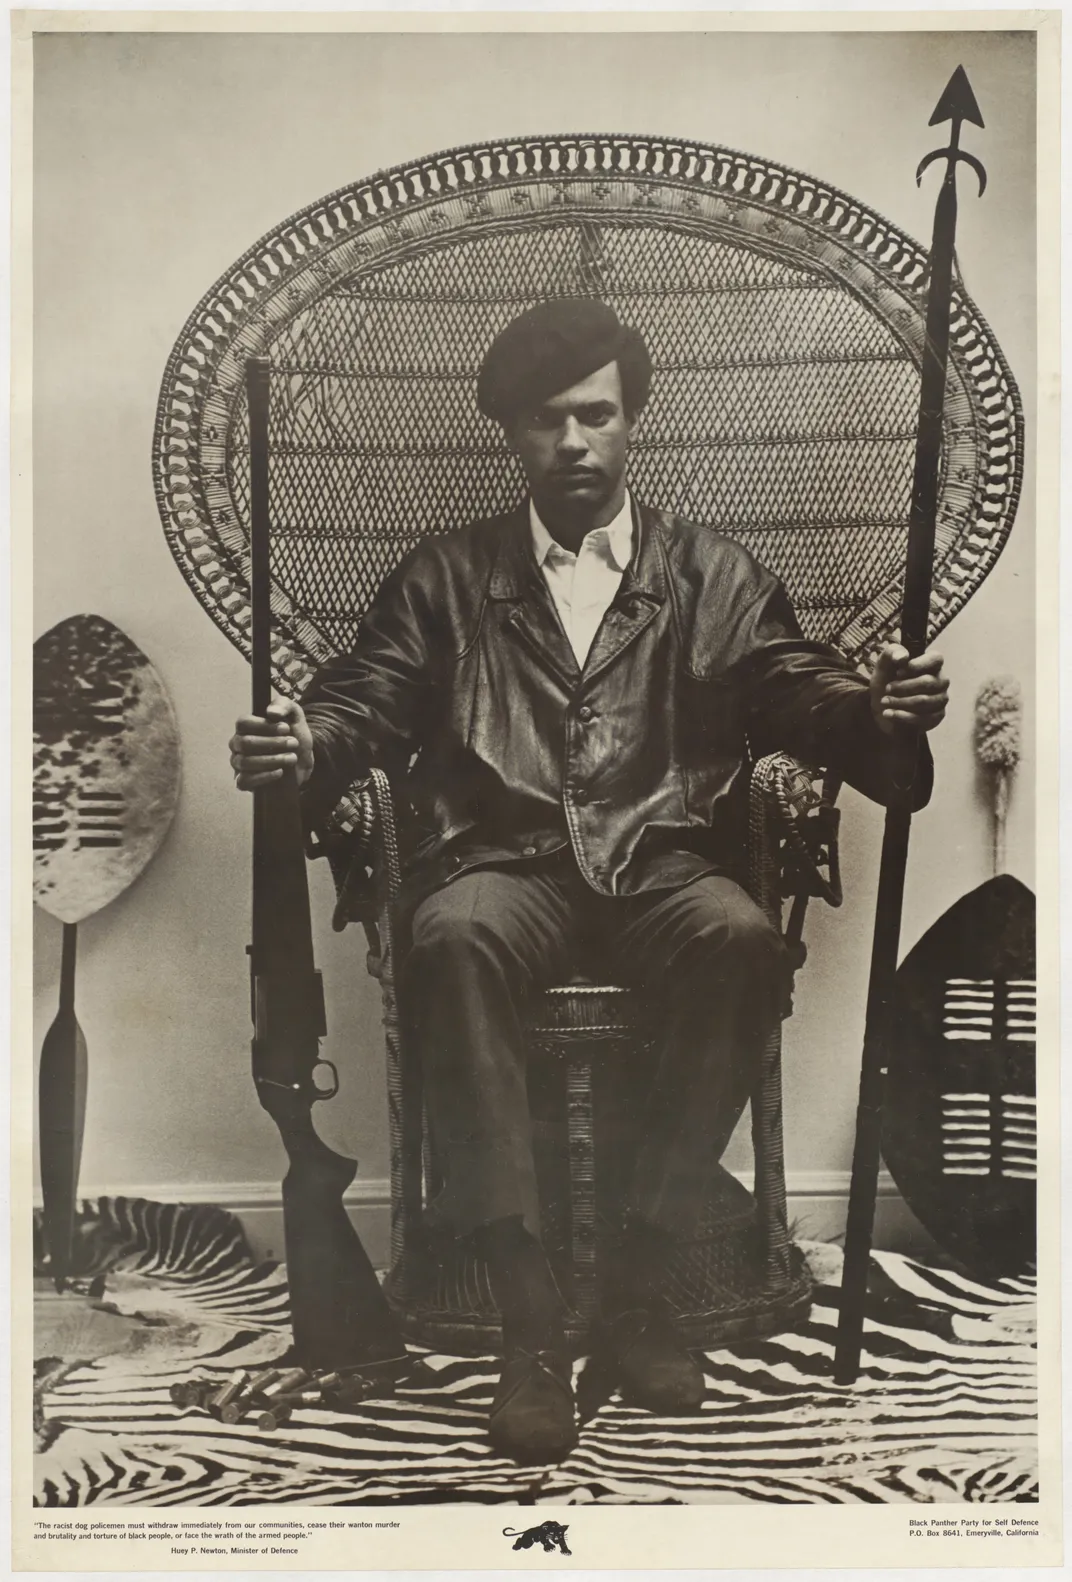 Eldridge Cleaver circulated this 1967 photograph of Huey posing with a spear and a rifle.